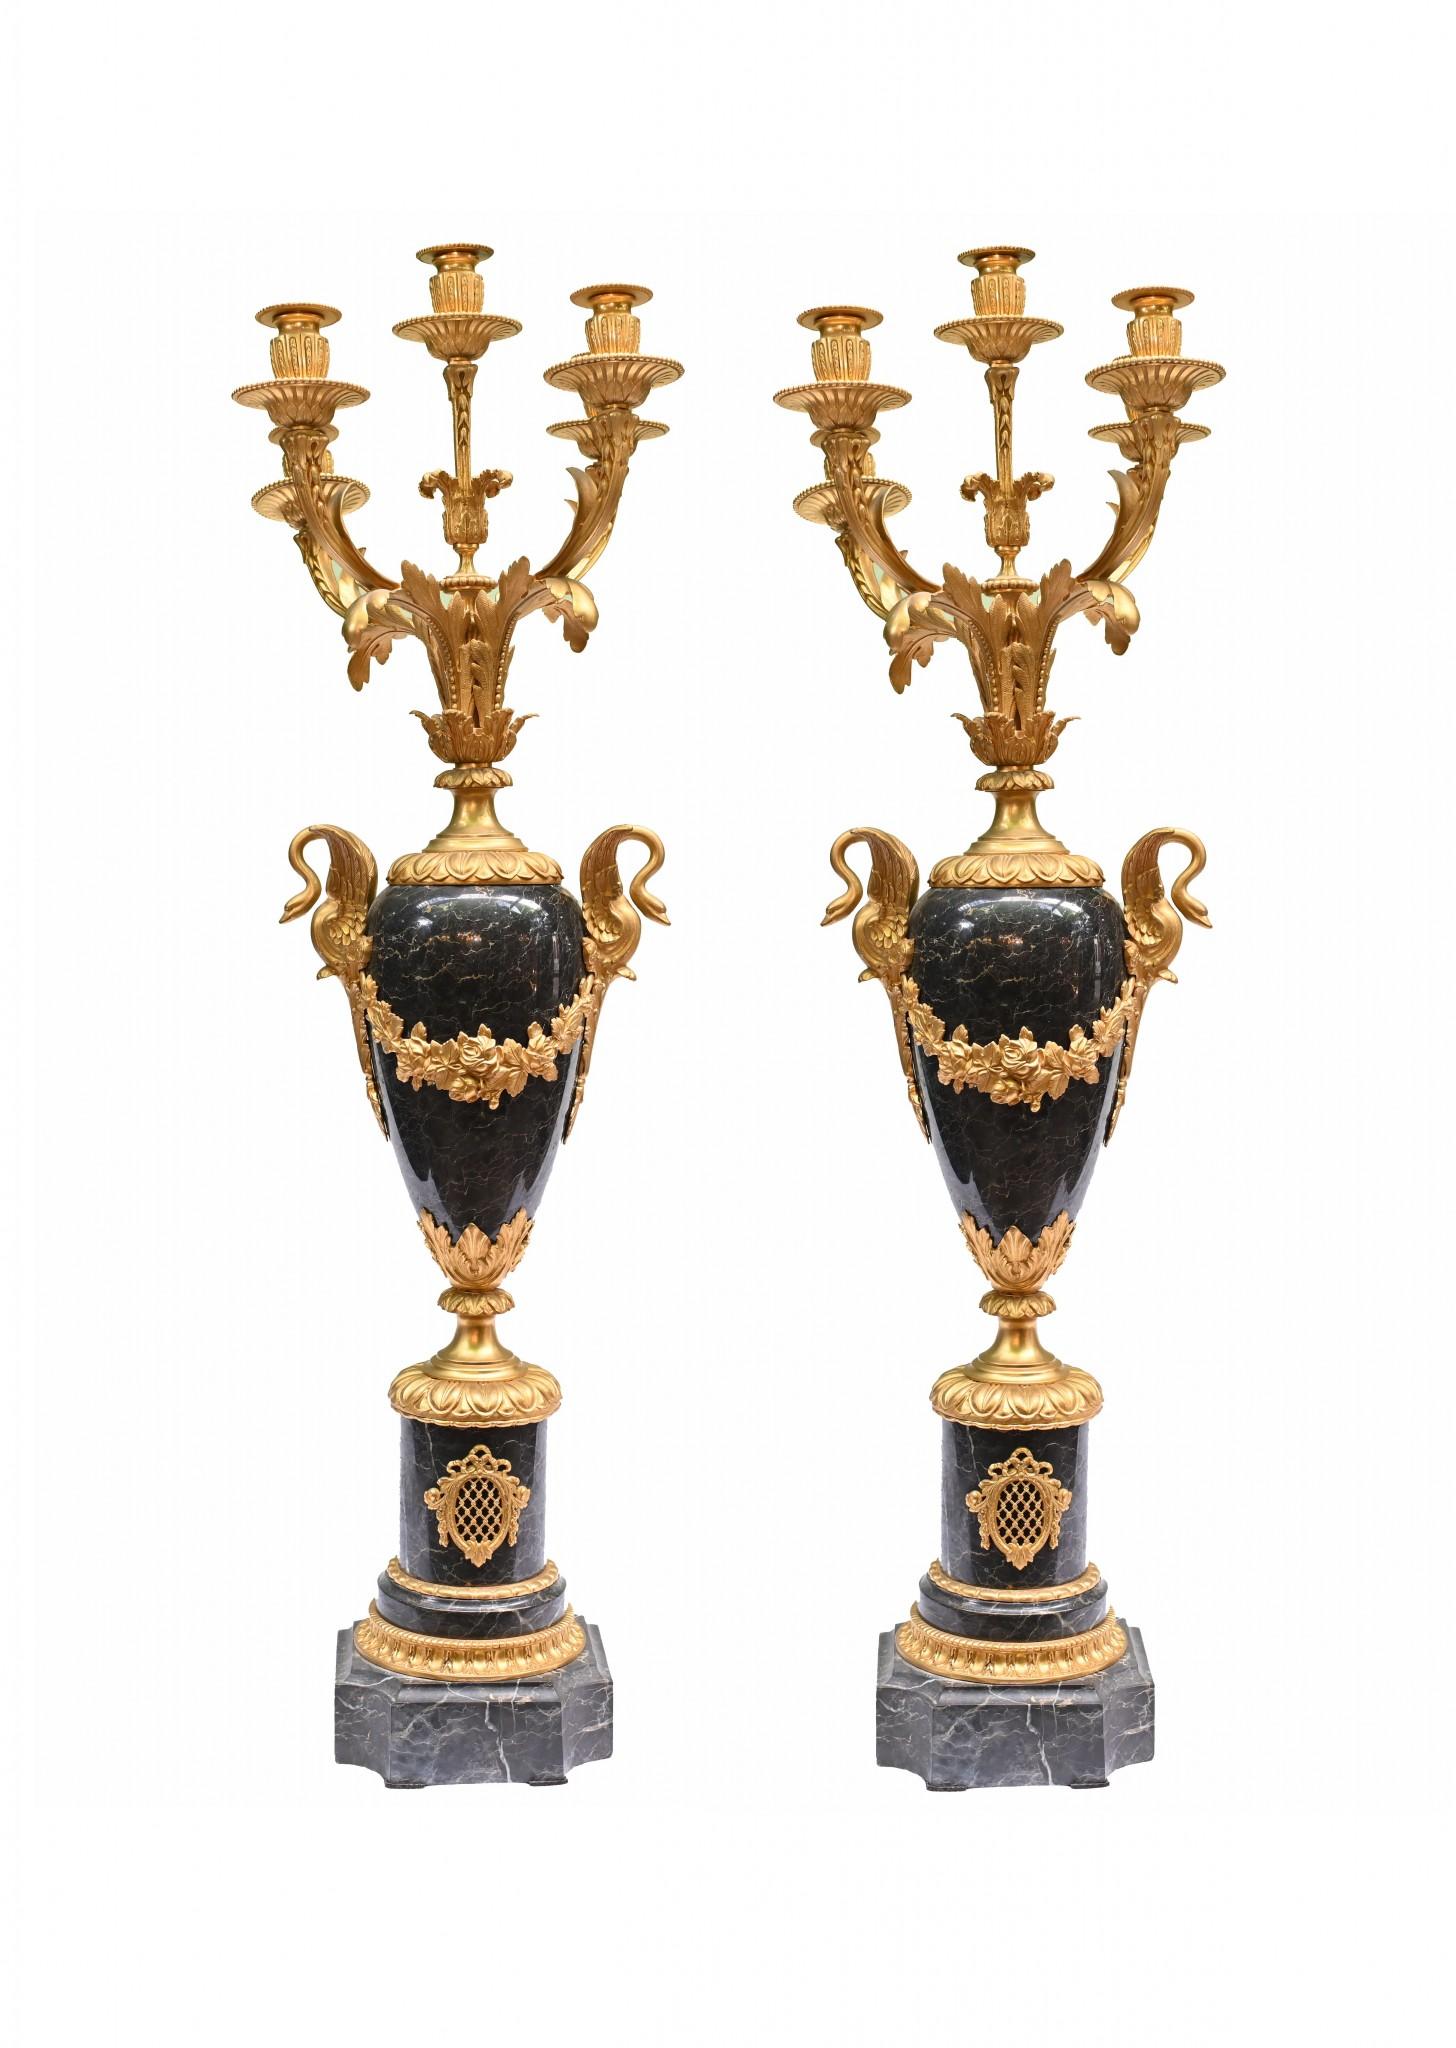 Pair Empire Gilt Candelabras Marble Urns 1870 French Antiques For Sale 1